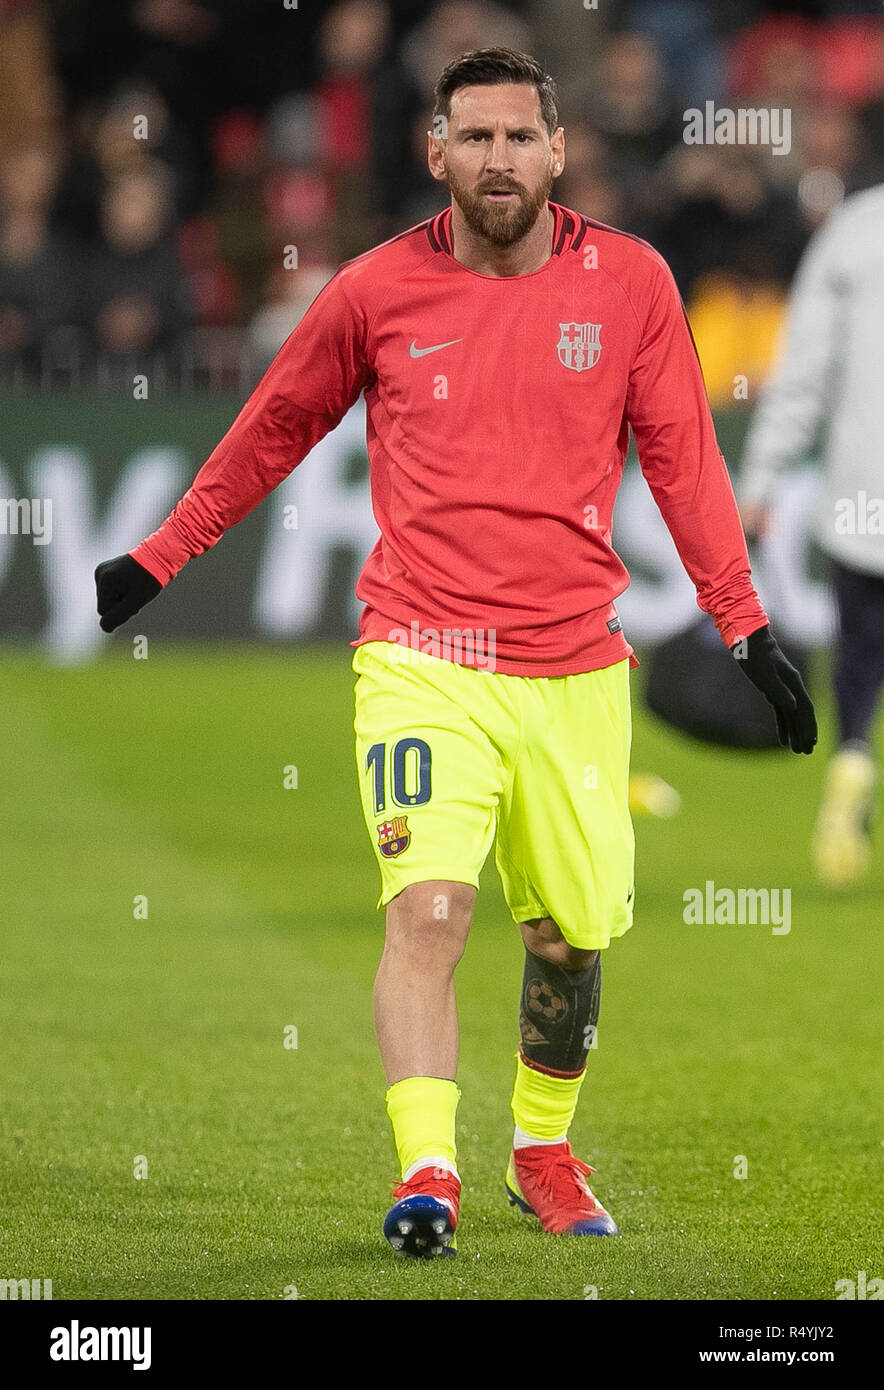 Eindhoven, Netherlands. 28th November 2018. Lionel Messi (FC Barcelona)  during the UEFA Champions League, Group B football match between PSV  Eindhoven and FC Barcelona on November 28, 2018 at Philips stadion in